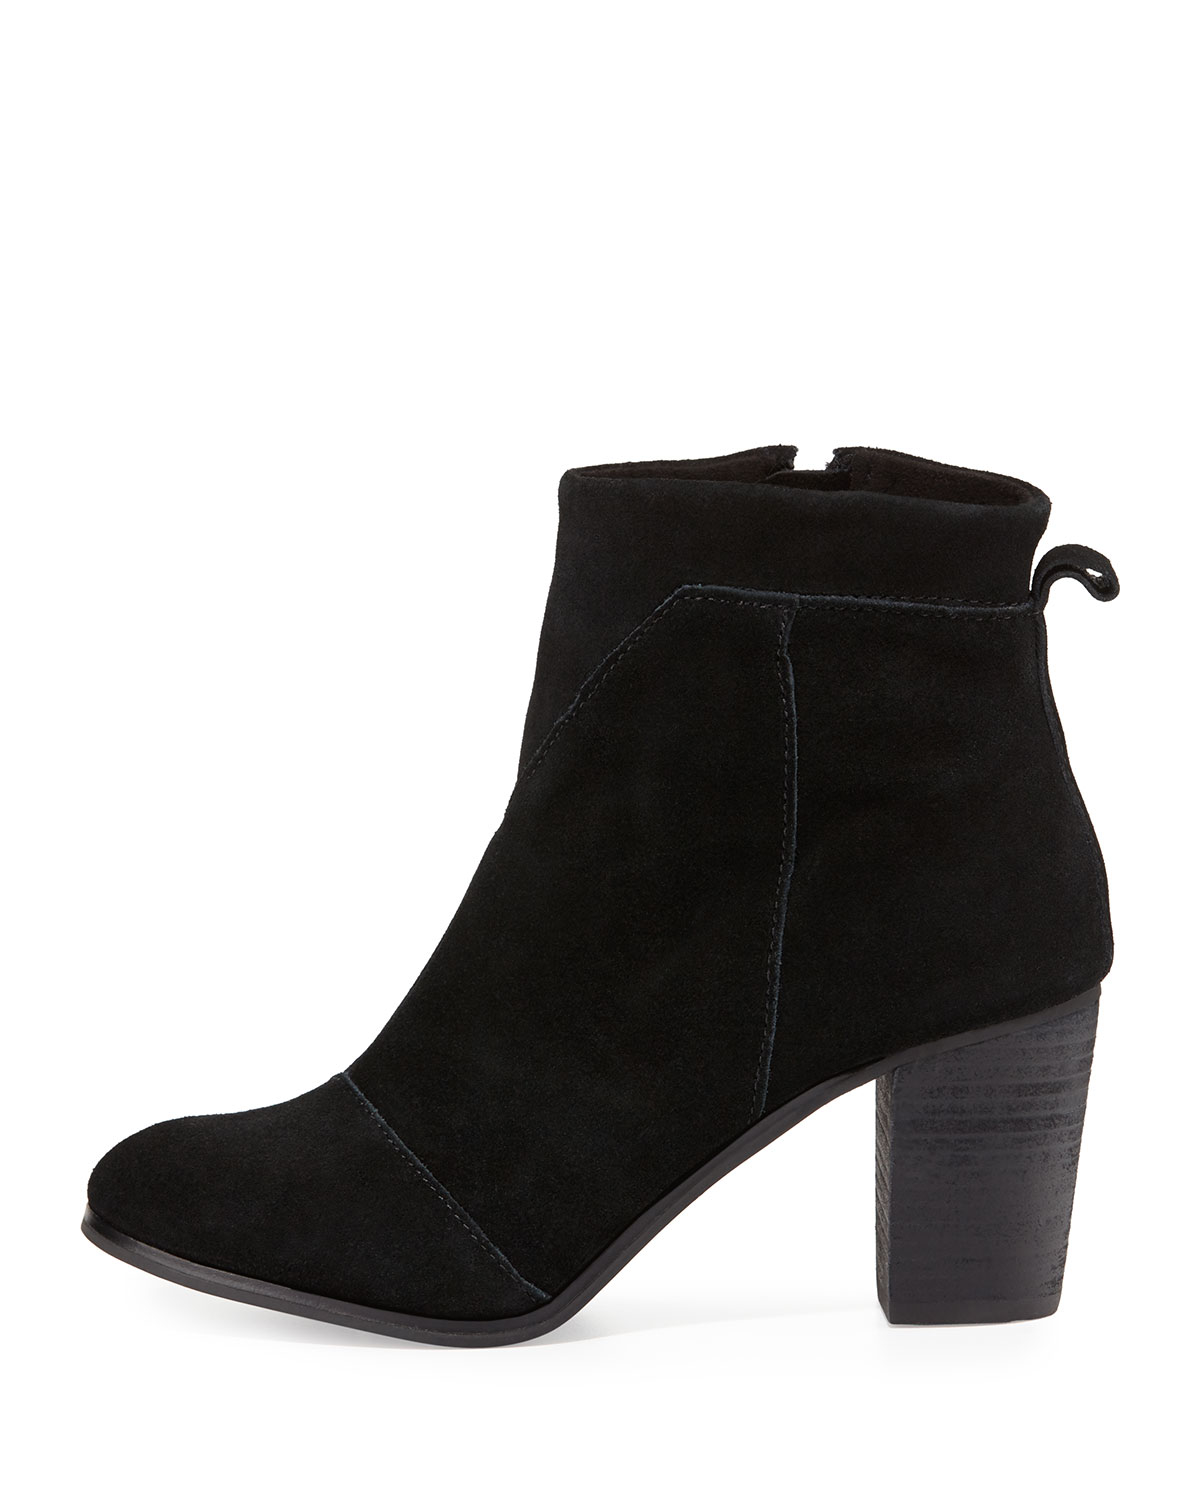 TOMS Lunata Suede Ankle Boots in Black - Lyst